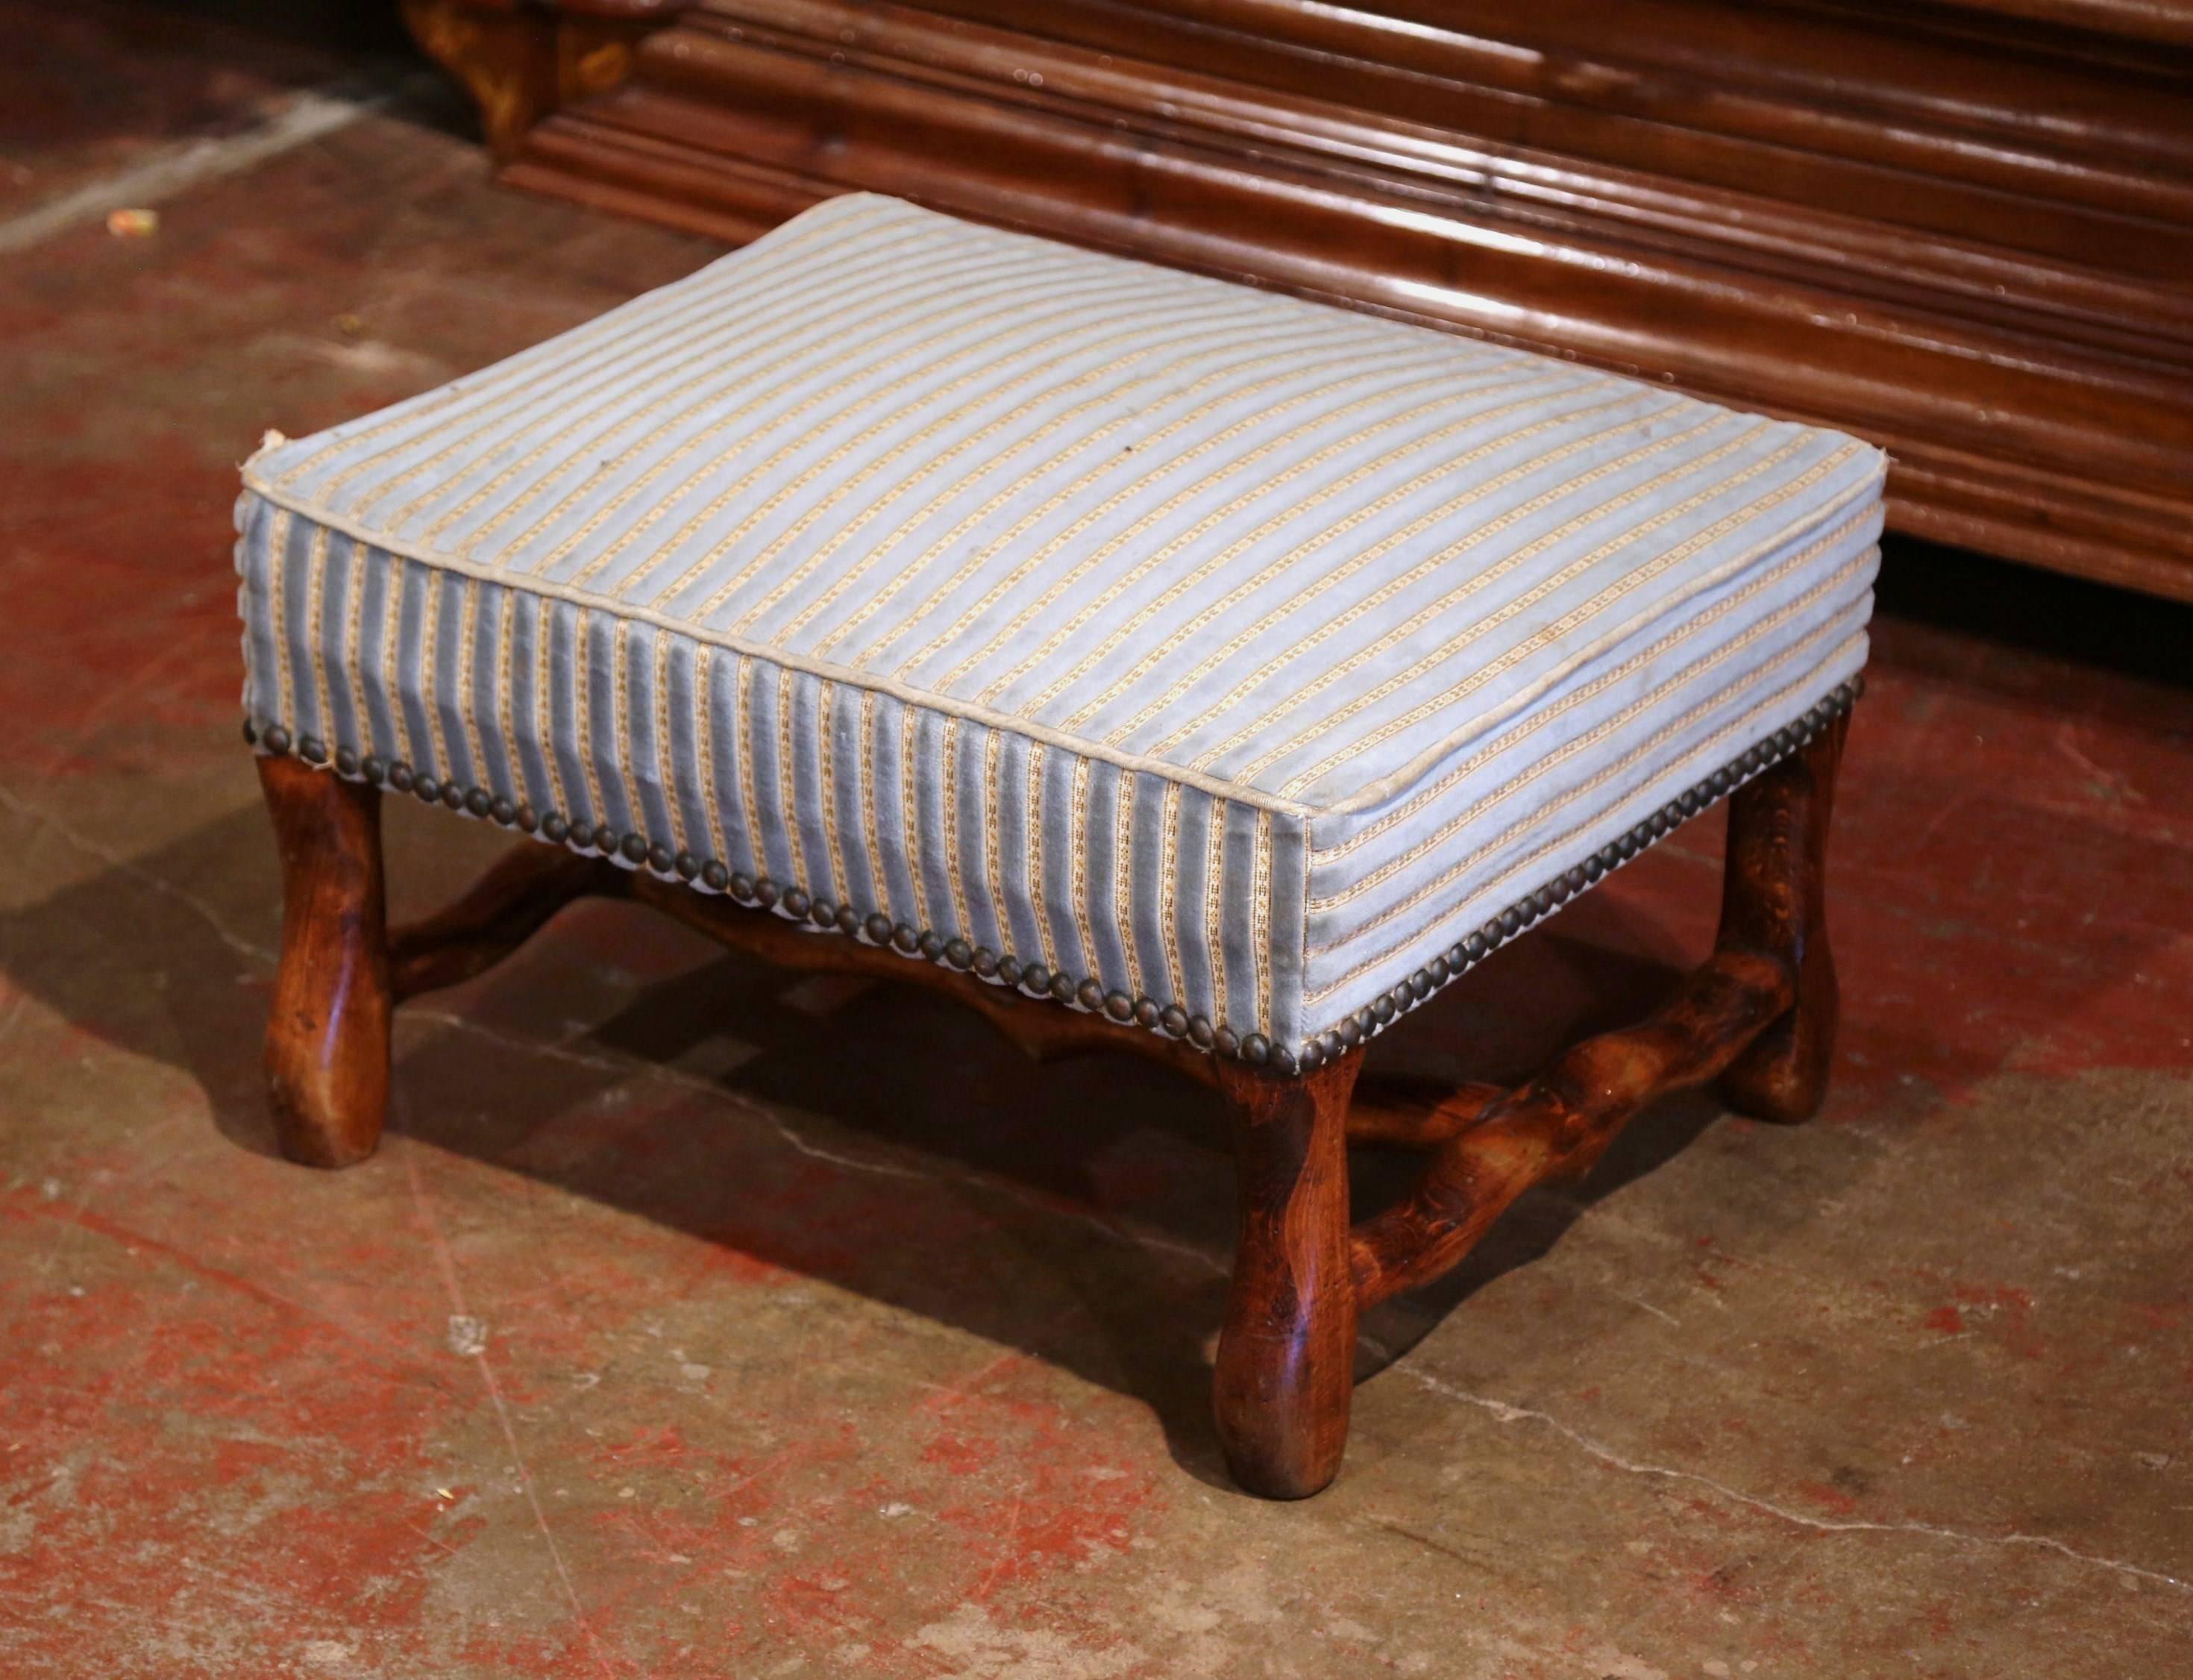 This elegant, antique ottoman was crafted in Southern France, circa 1920. The large foot stool stands on four carved 